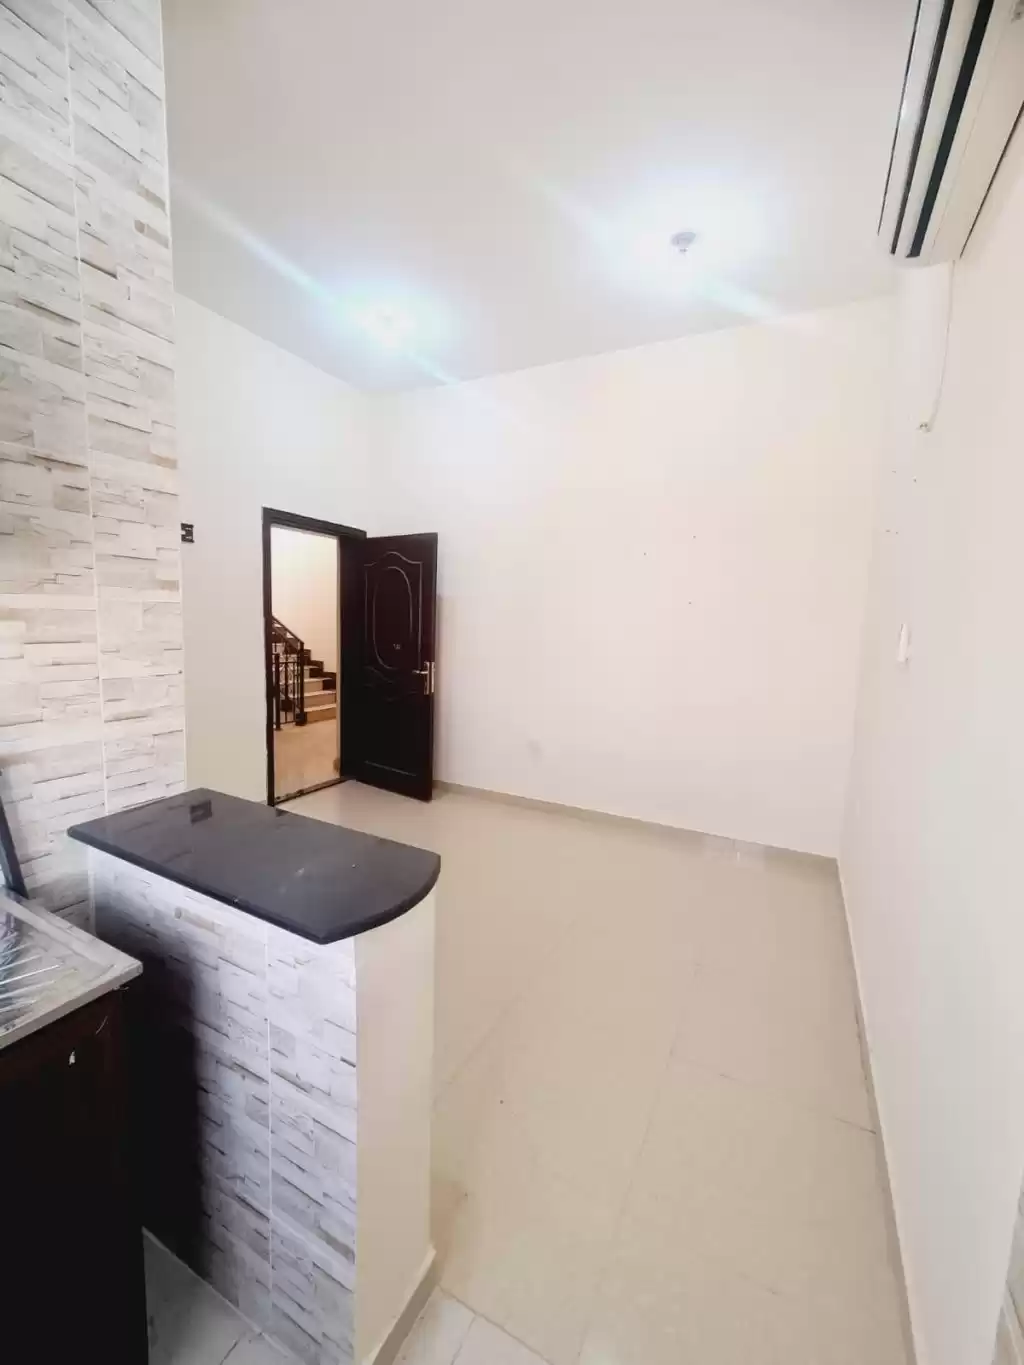 Residential Ready Property Studio U/F Apartment  for rent in Al Sadd , Doha #15524 - 1  image 